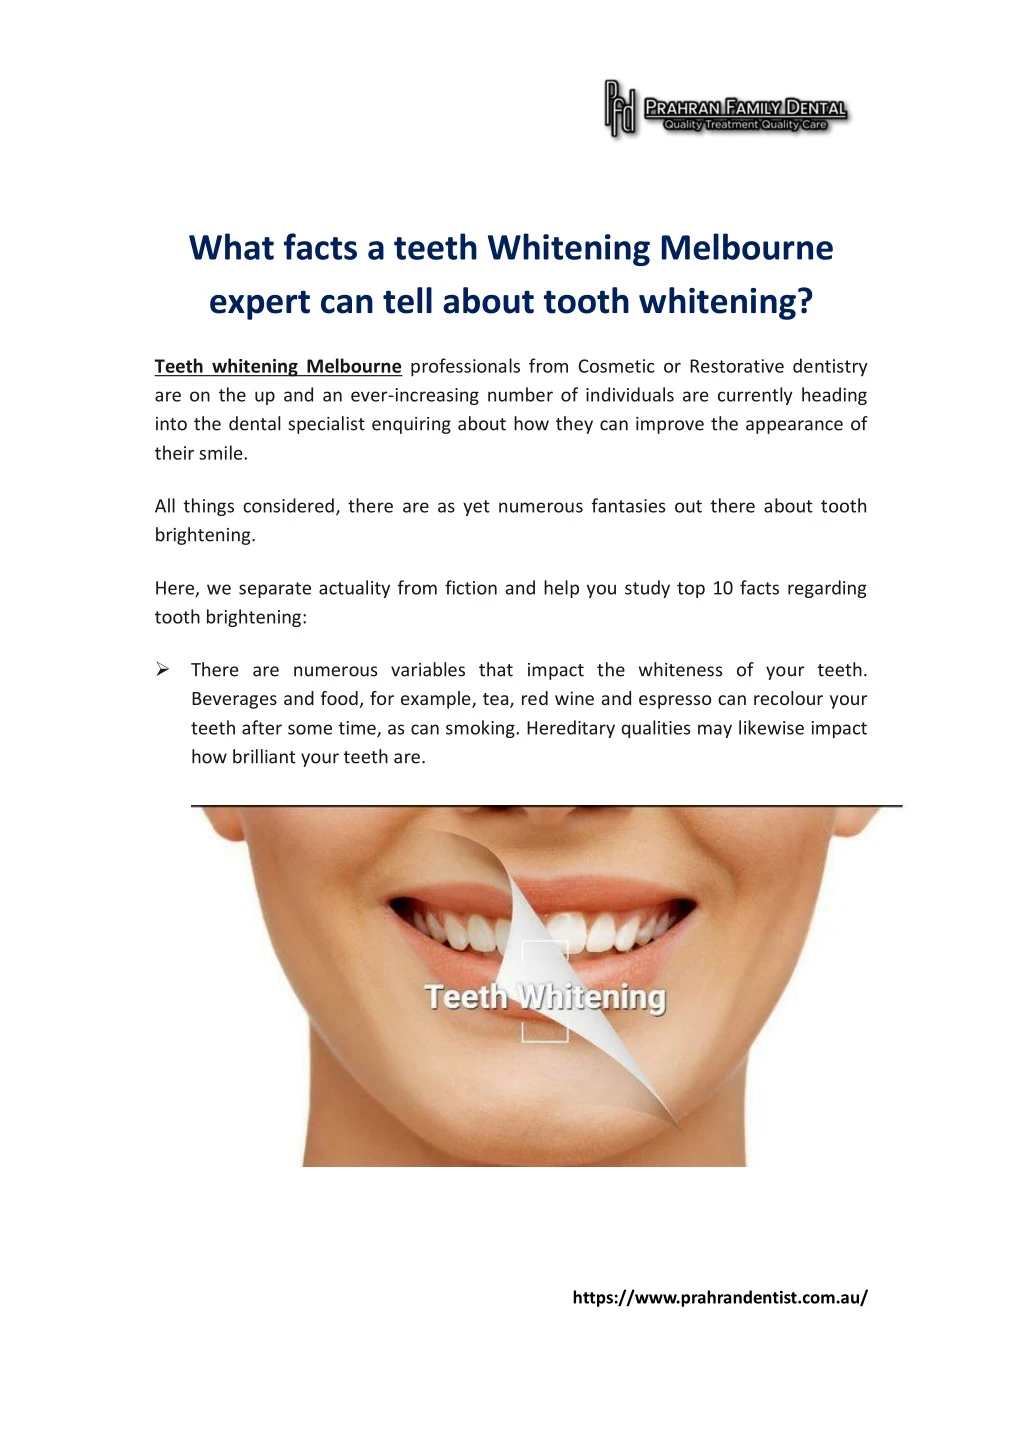 what facts a teeth whitening melbourne expert